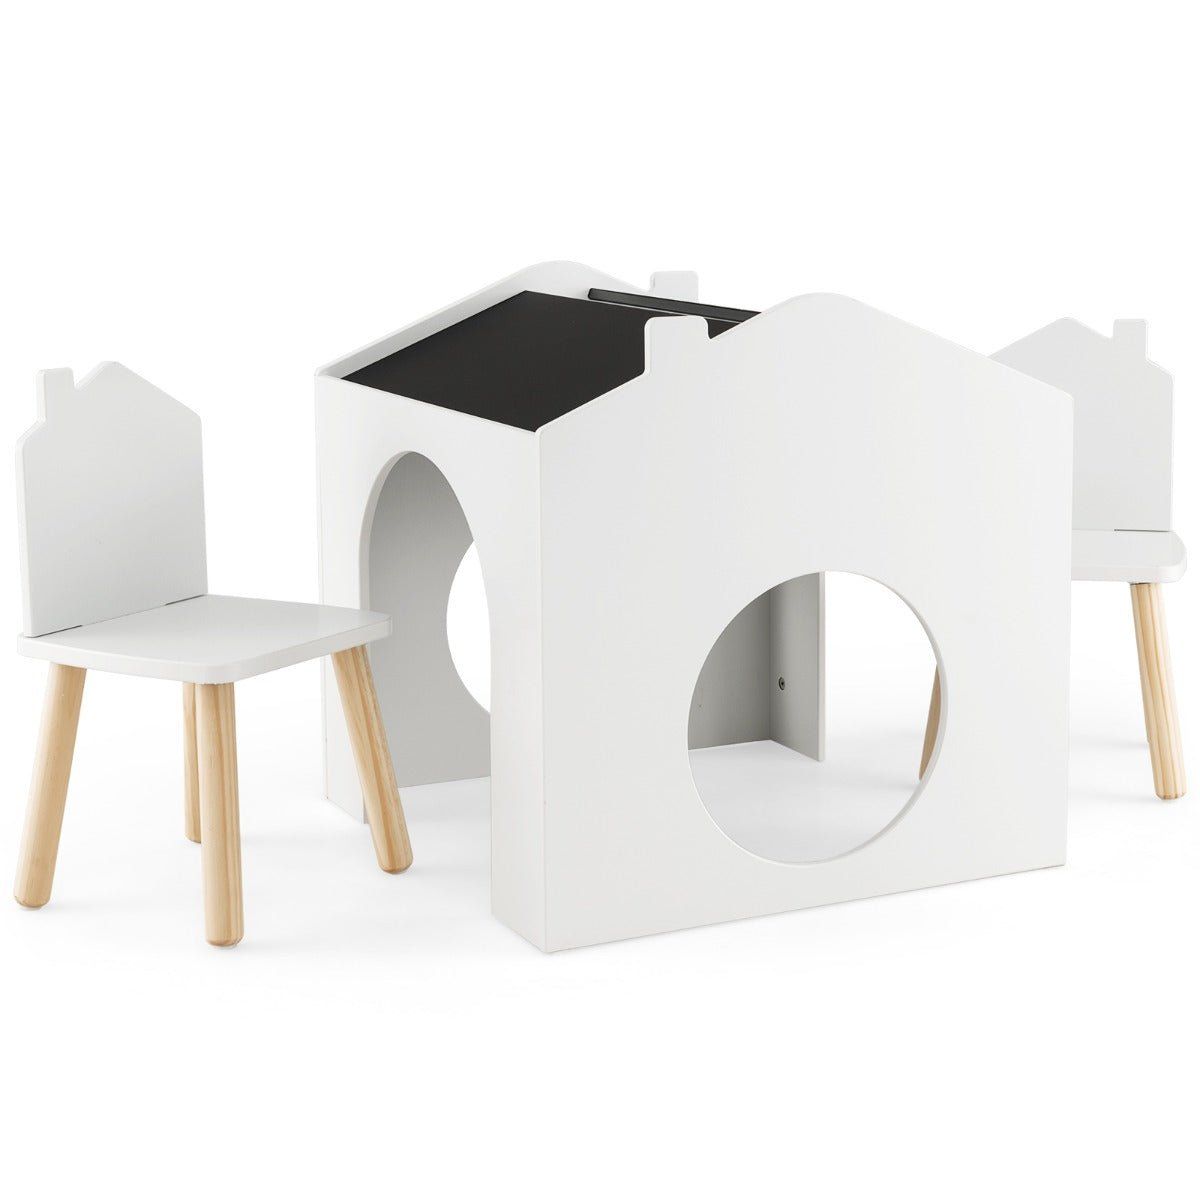 The Timeless Charm of Kids Wooden Table and Chairs Sets: Perfect for Playtime and Creativity!